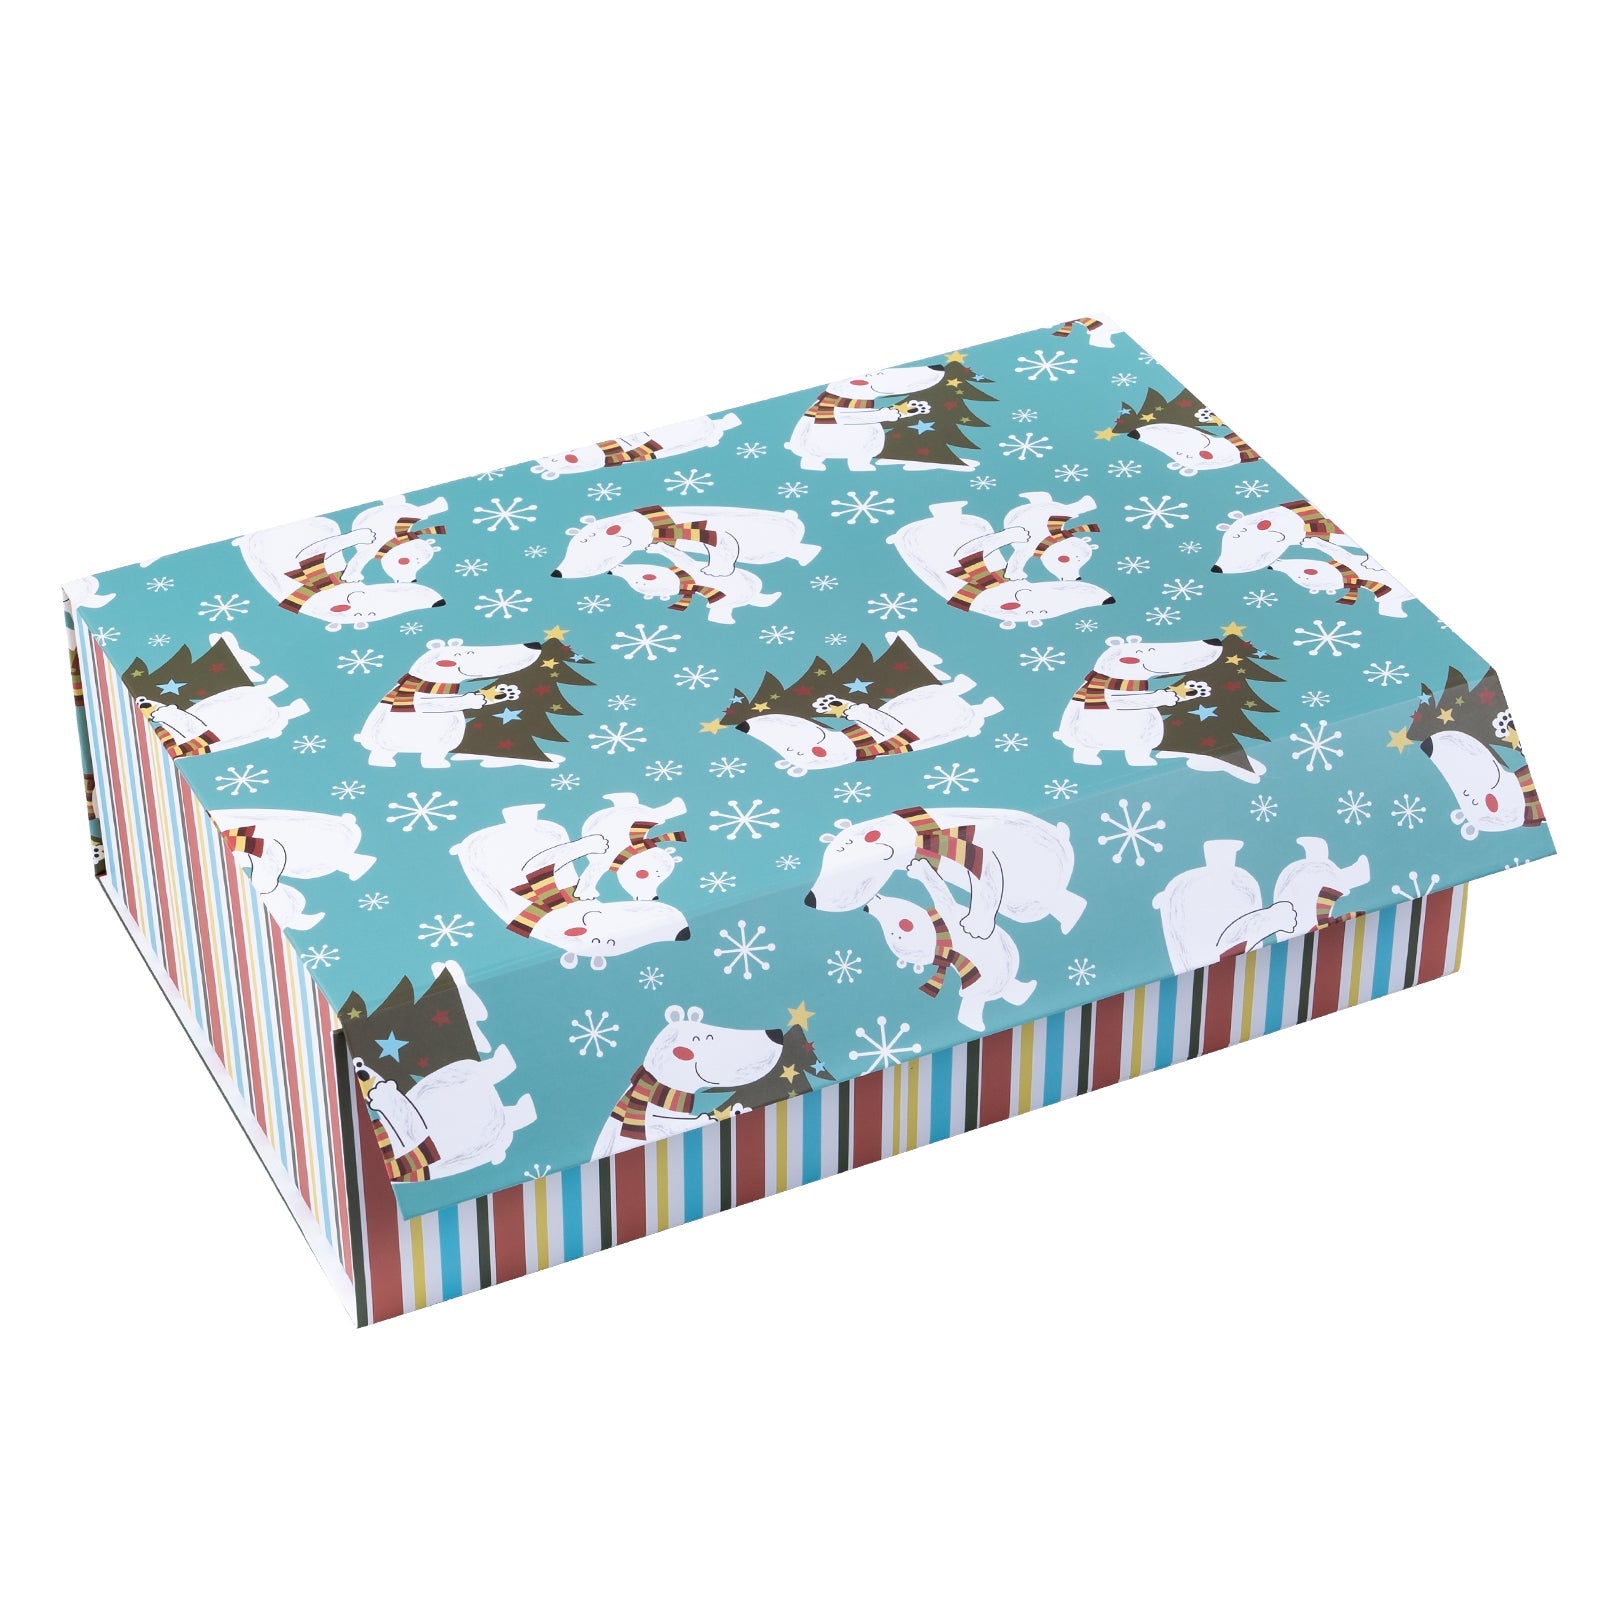 14x9x4.3 inch Collapsible Gift Box with Magnetic Closure - Dancing Bear